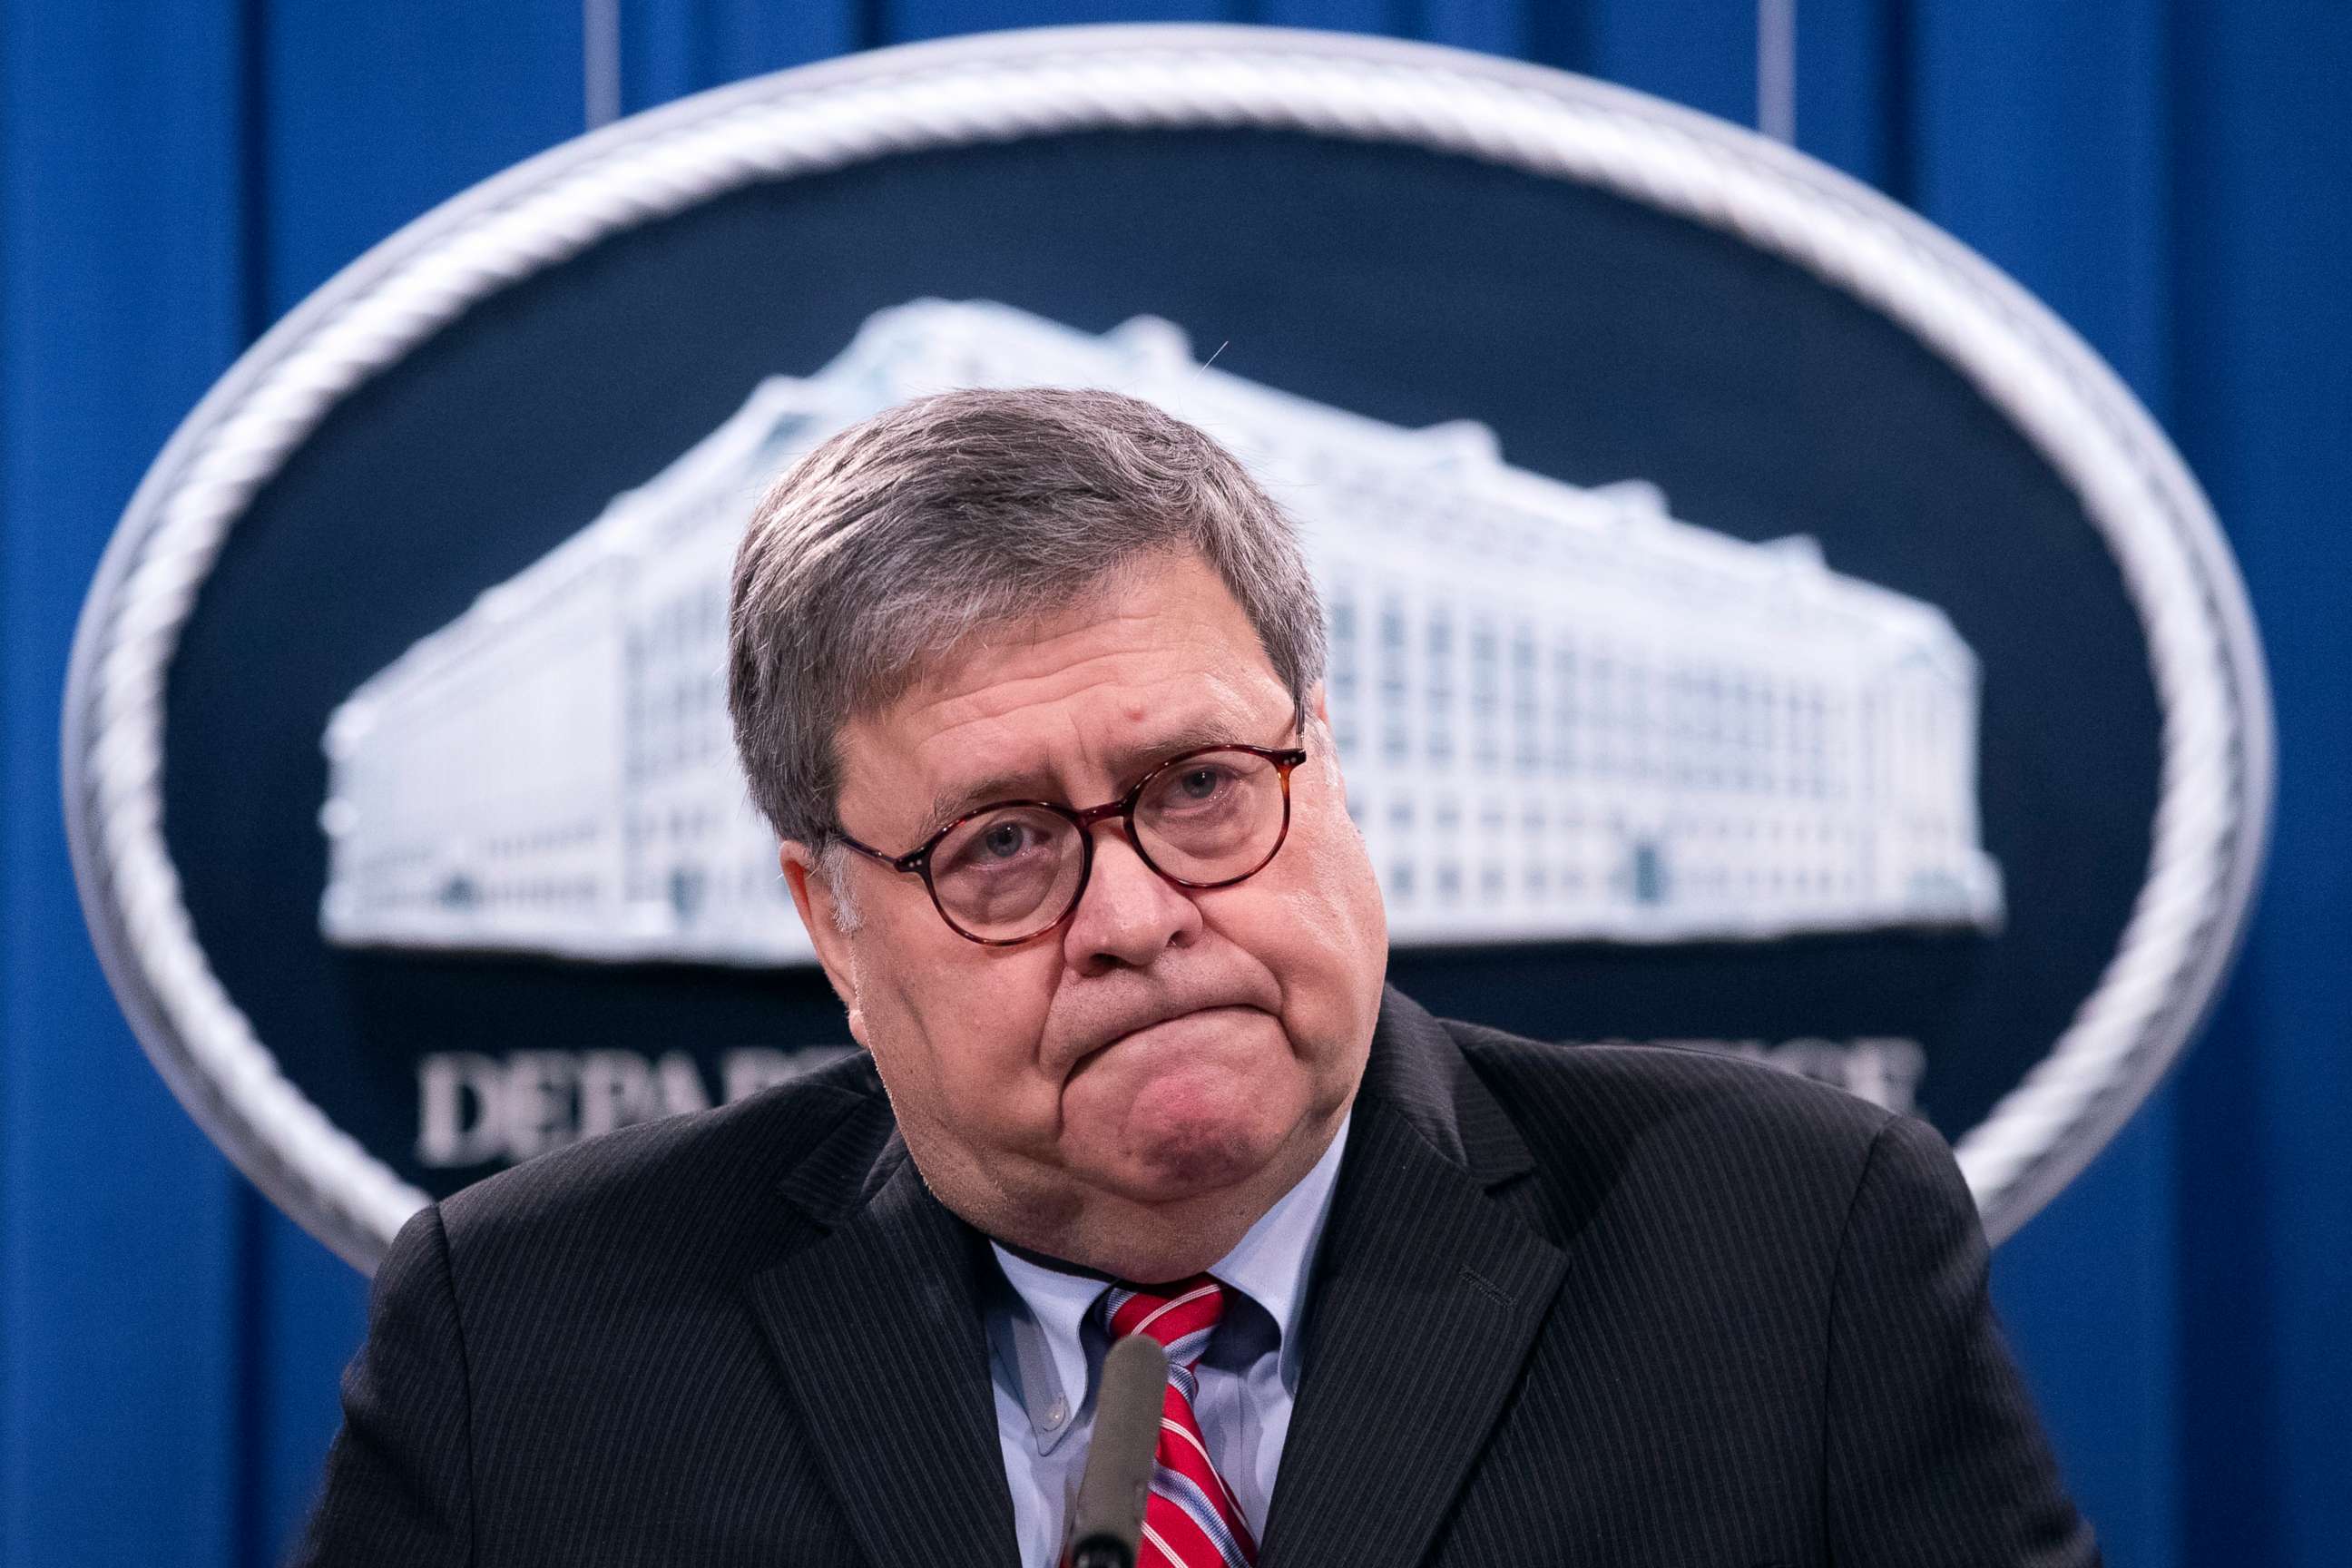 PHOTO: Attorney General Bill Barr holds a news conference at the Department of Justice December 21, 2020 in Washington, DC.